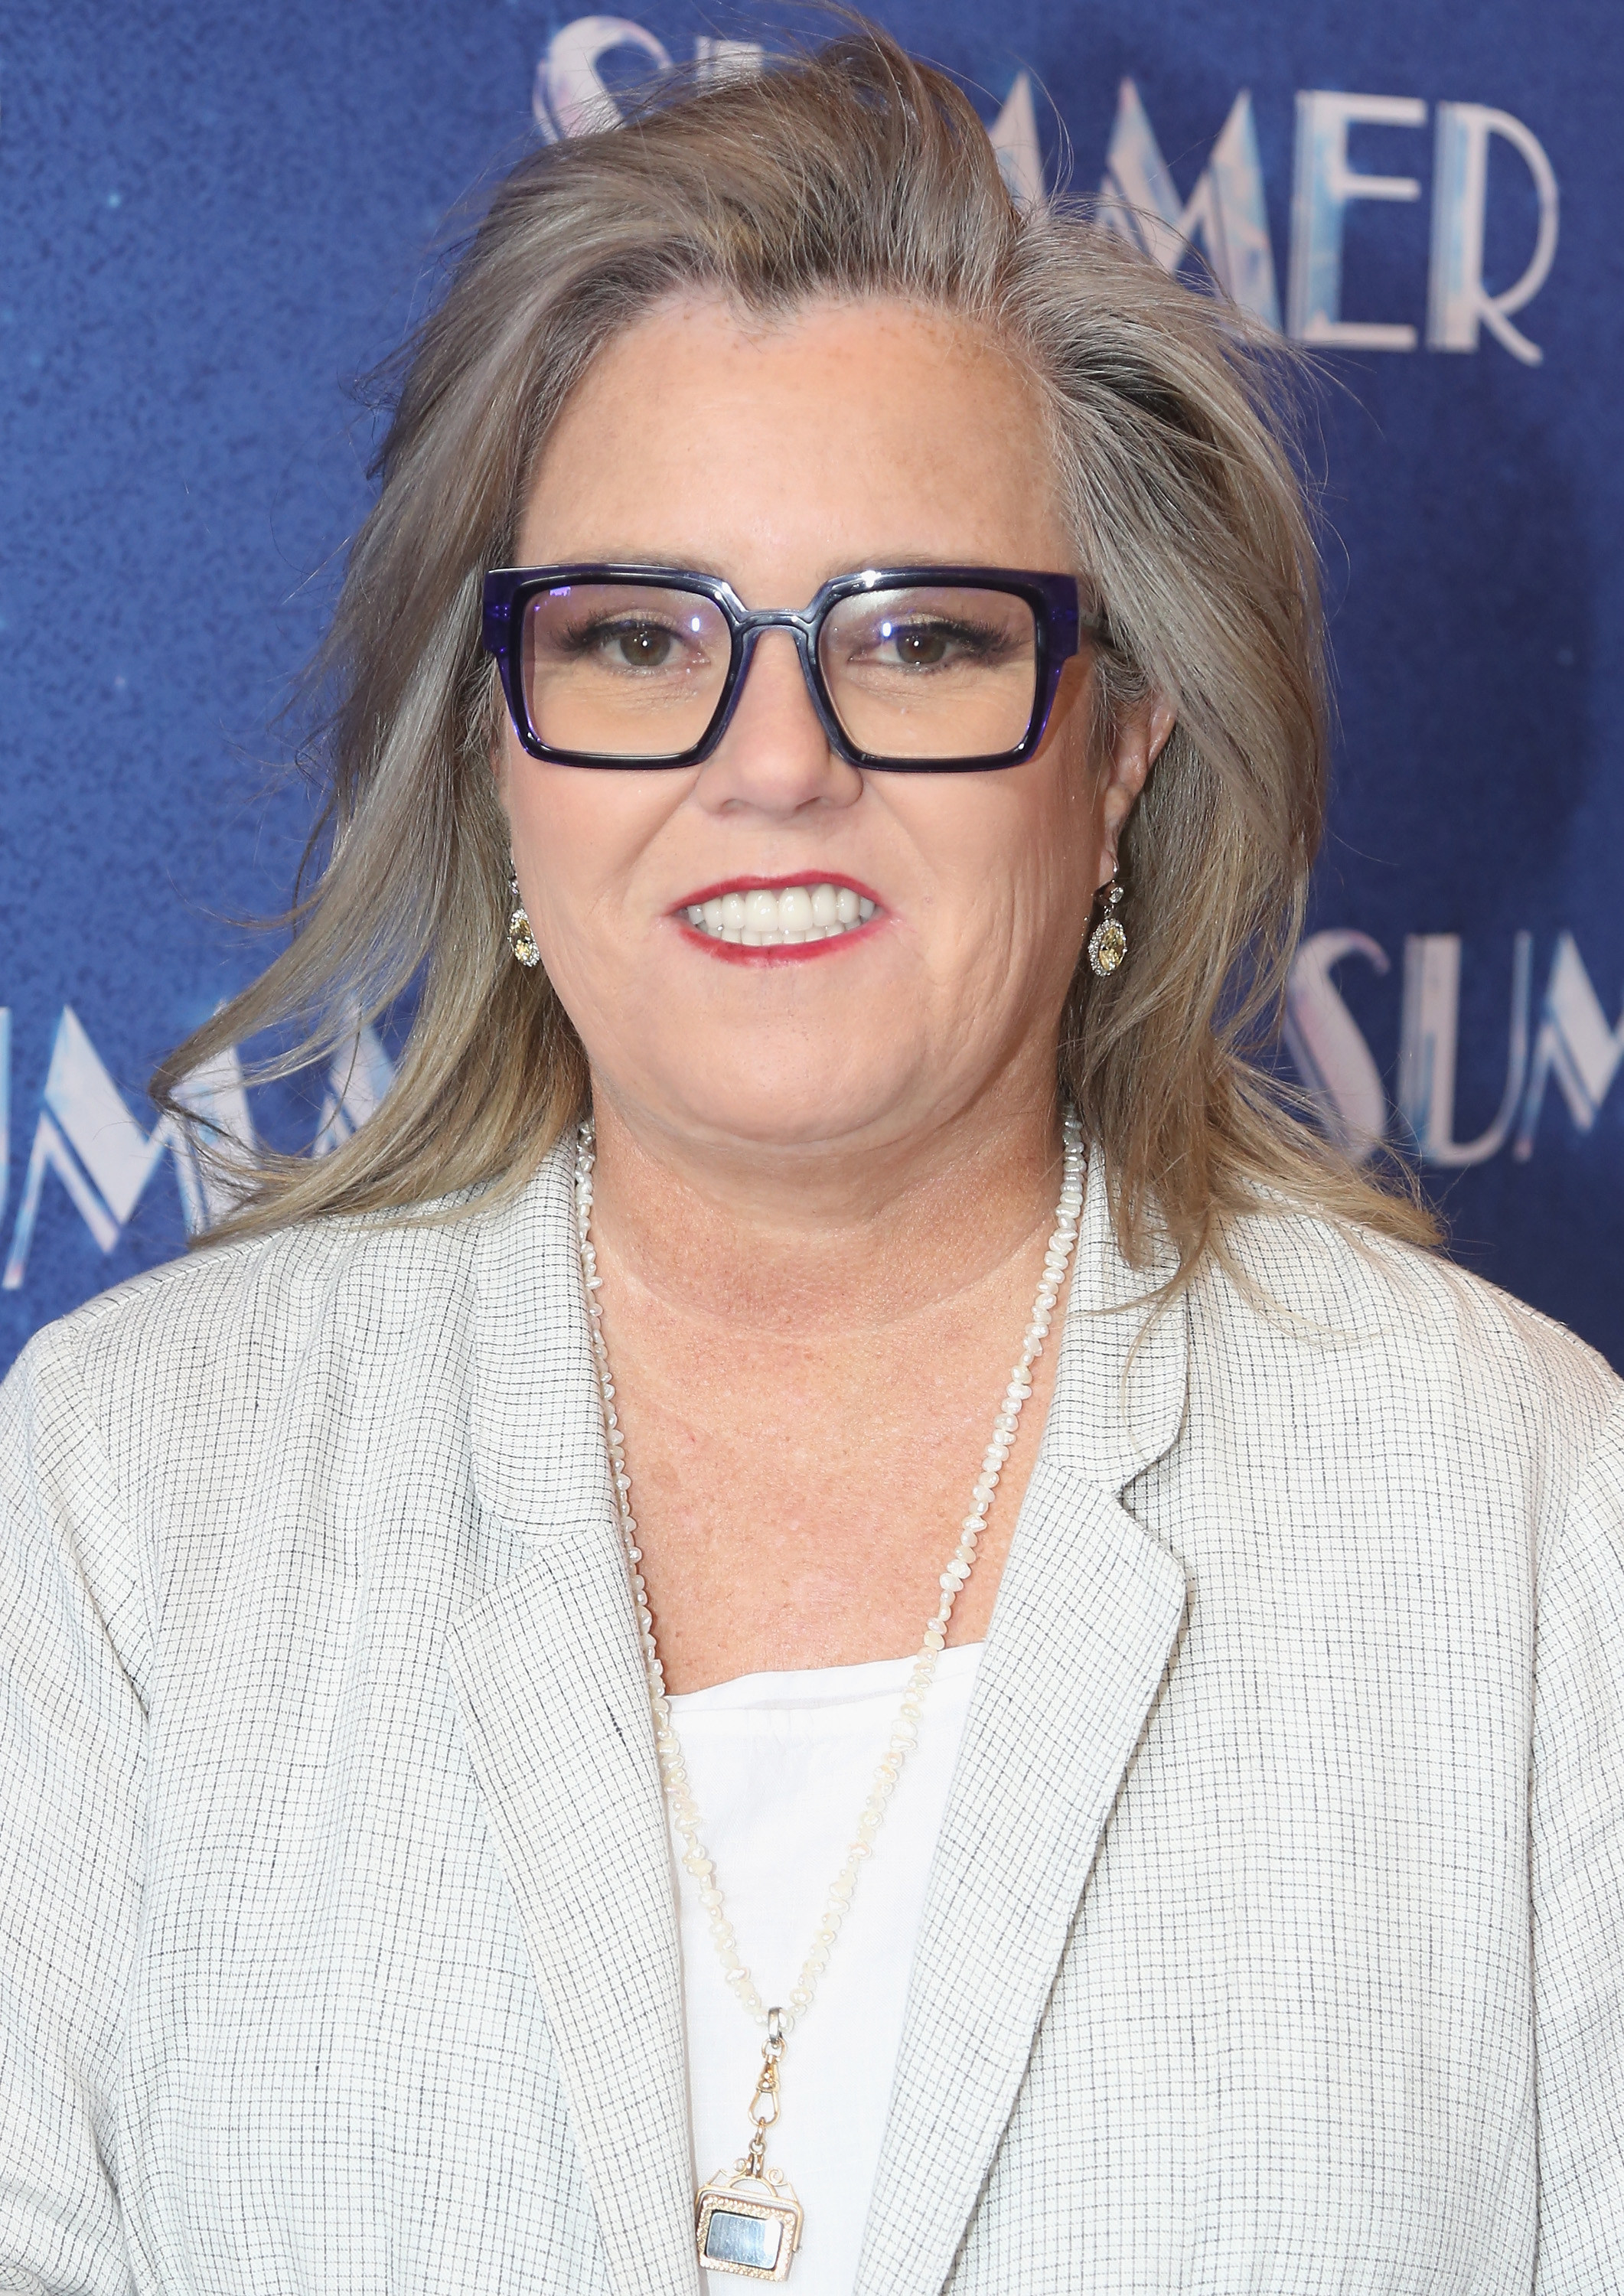 Rosie O&#x27;Donnell wears thick black glasses and a light grey suit jacket on a red carpet